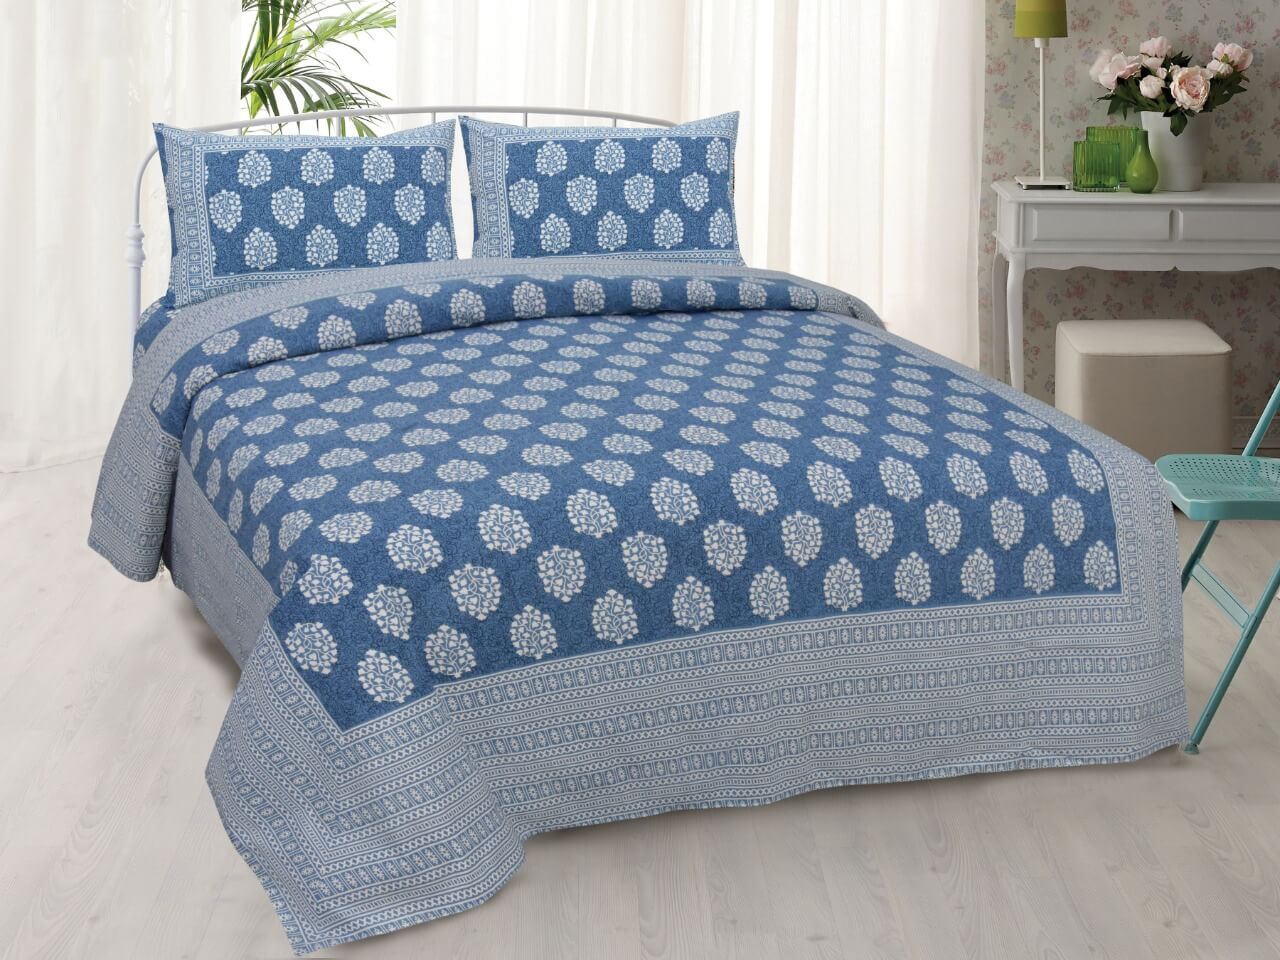 QUEEN SIZE ETHNIC JAIPURI PRINT BEDSHEET WITH TWO PILLOW COVERS ...